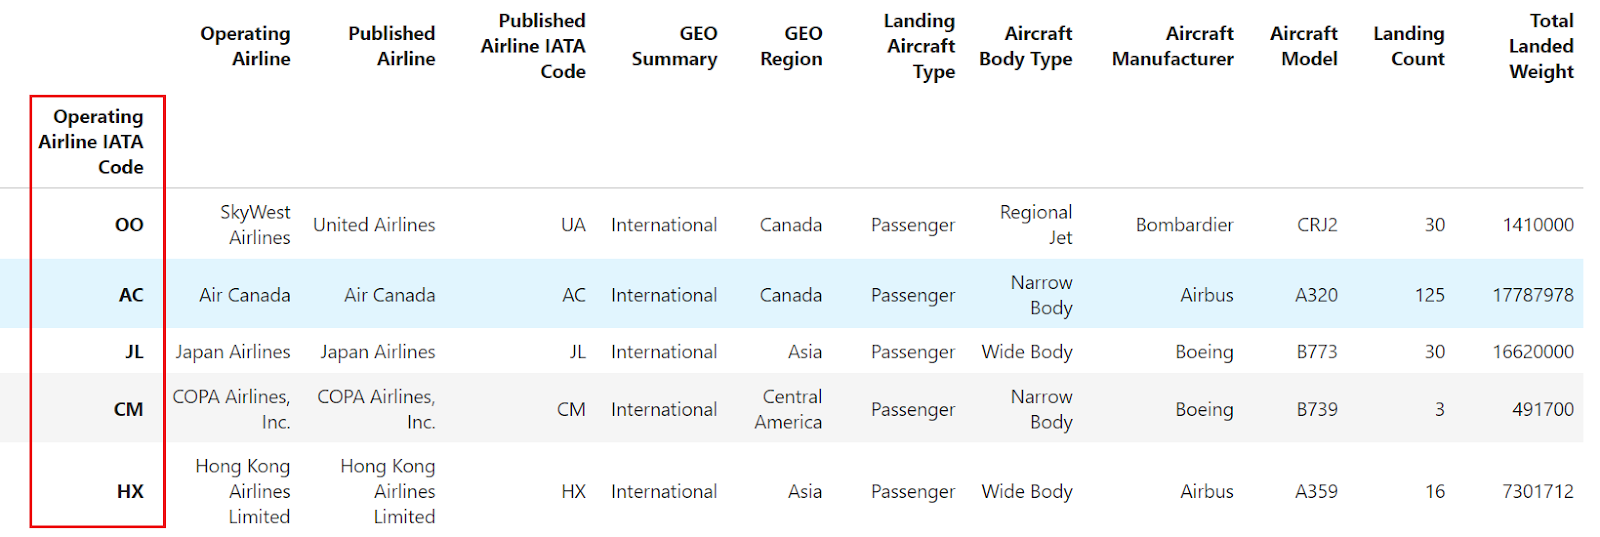 setting the column Operating Airline IATA Code as the new index of the dataframe